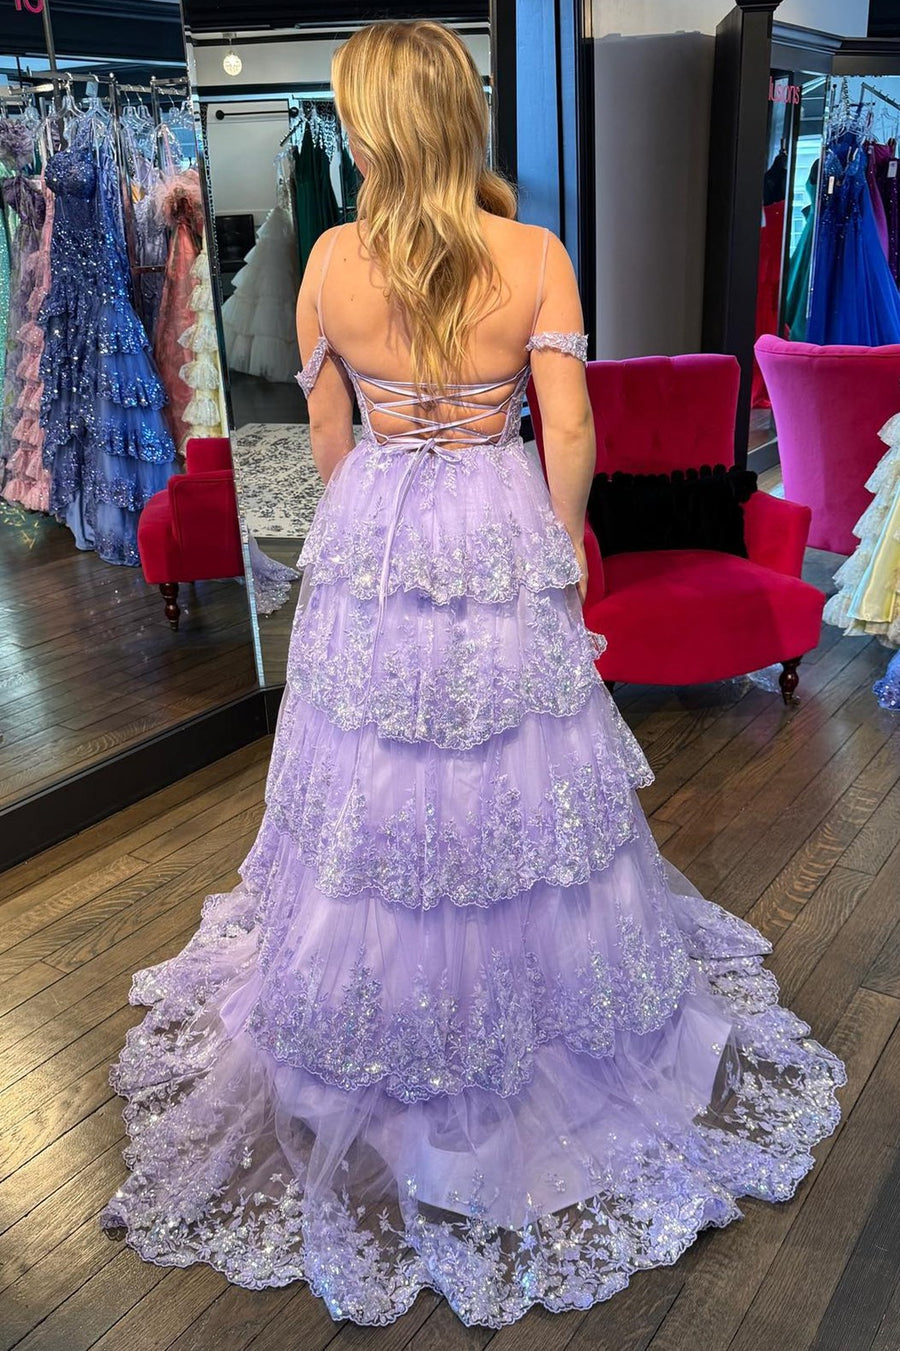 Tulle Sequin Cold-Shoulder Ruffle Tiered Long Prom Dress